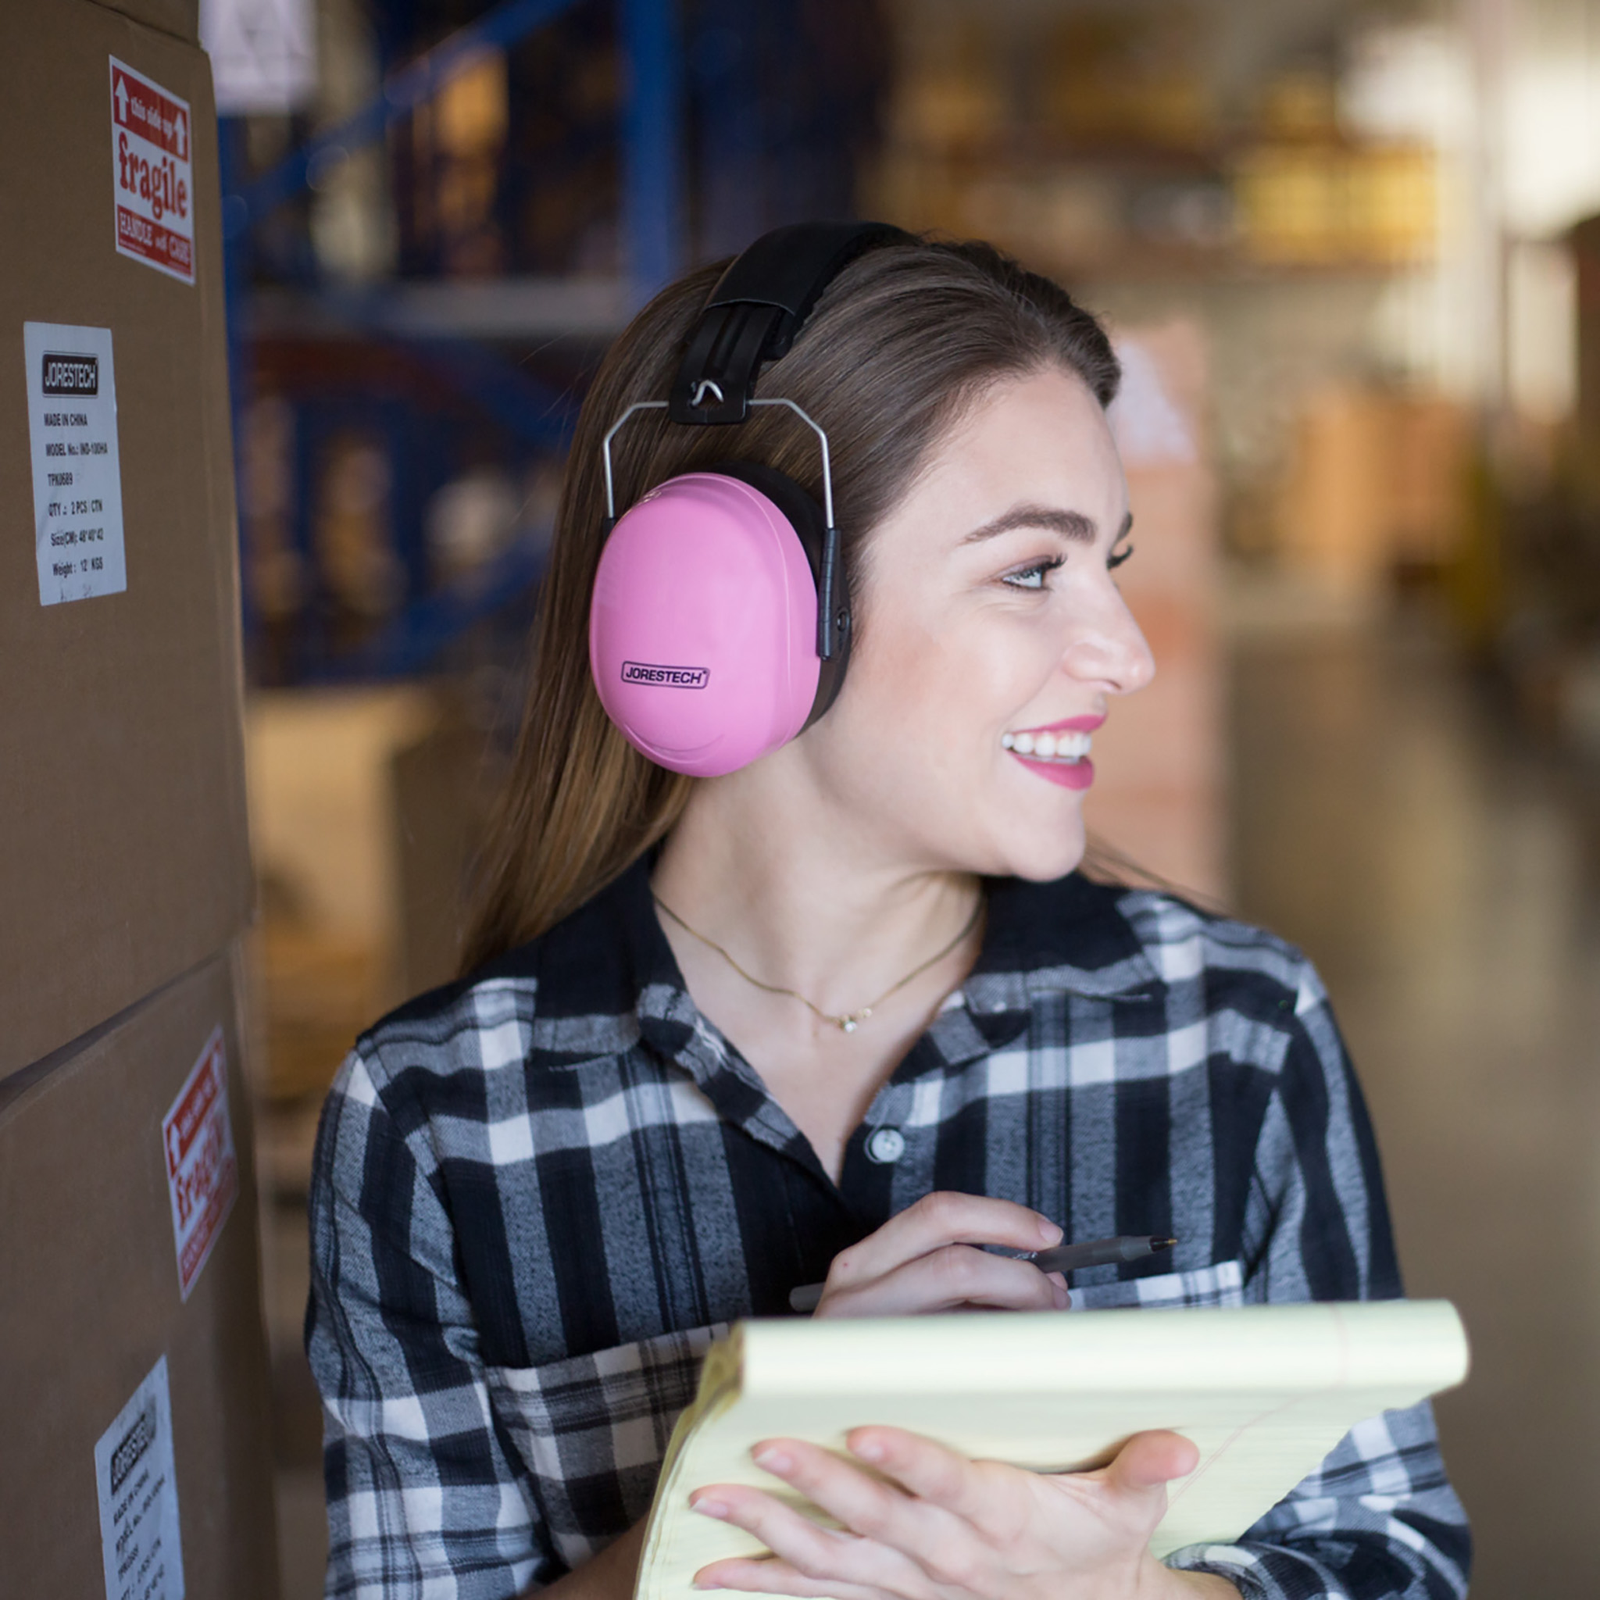 A lady using the JORESTECH pink ear muffs for hearing protection while she is counting in a manufacturer